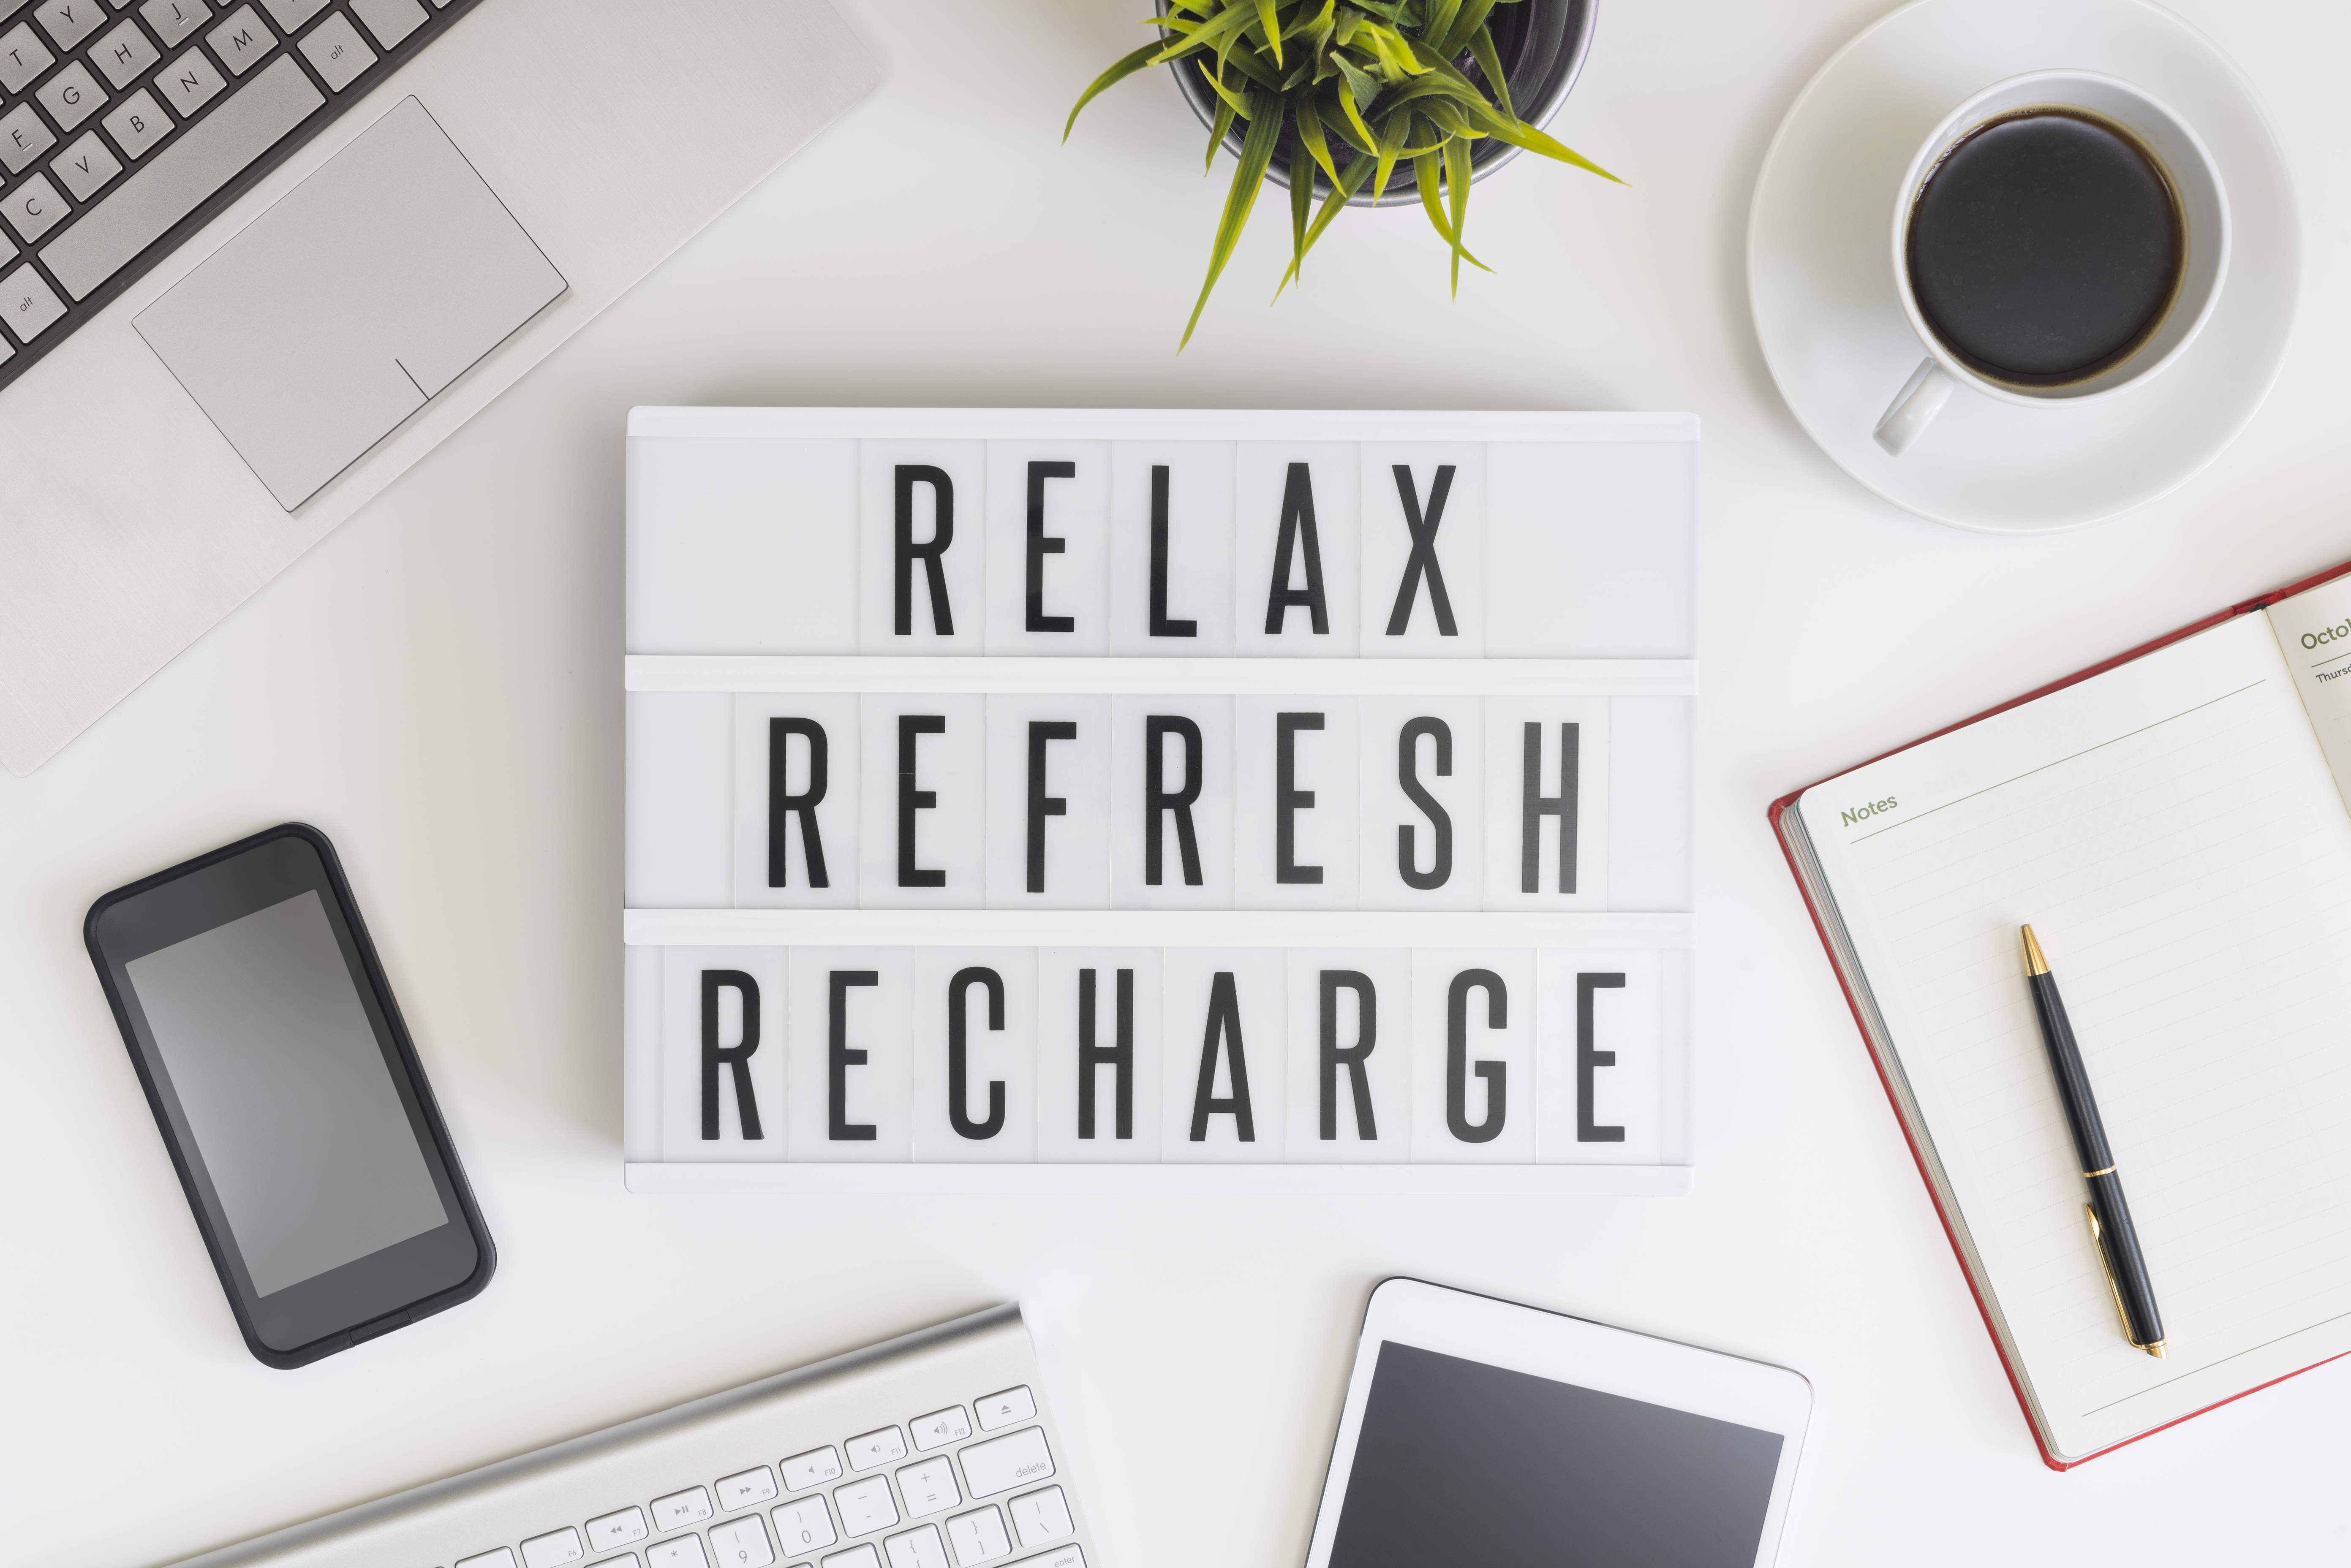 Take Breaks to Relax Refresh and Recharge